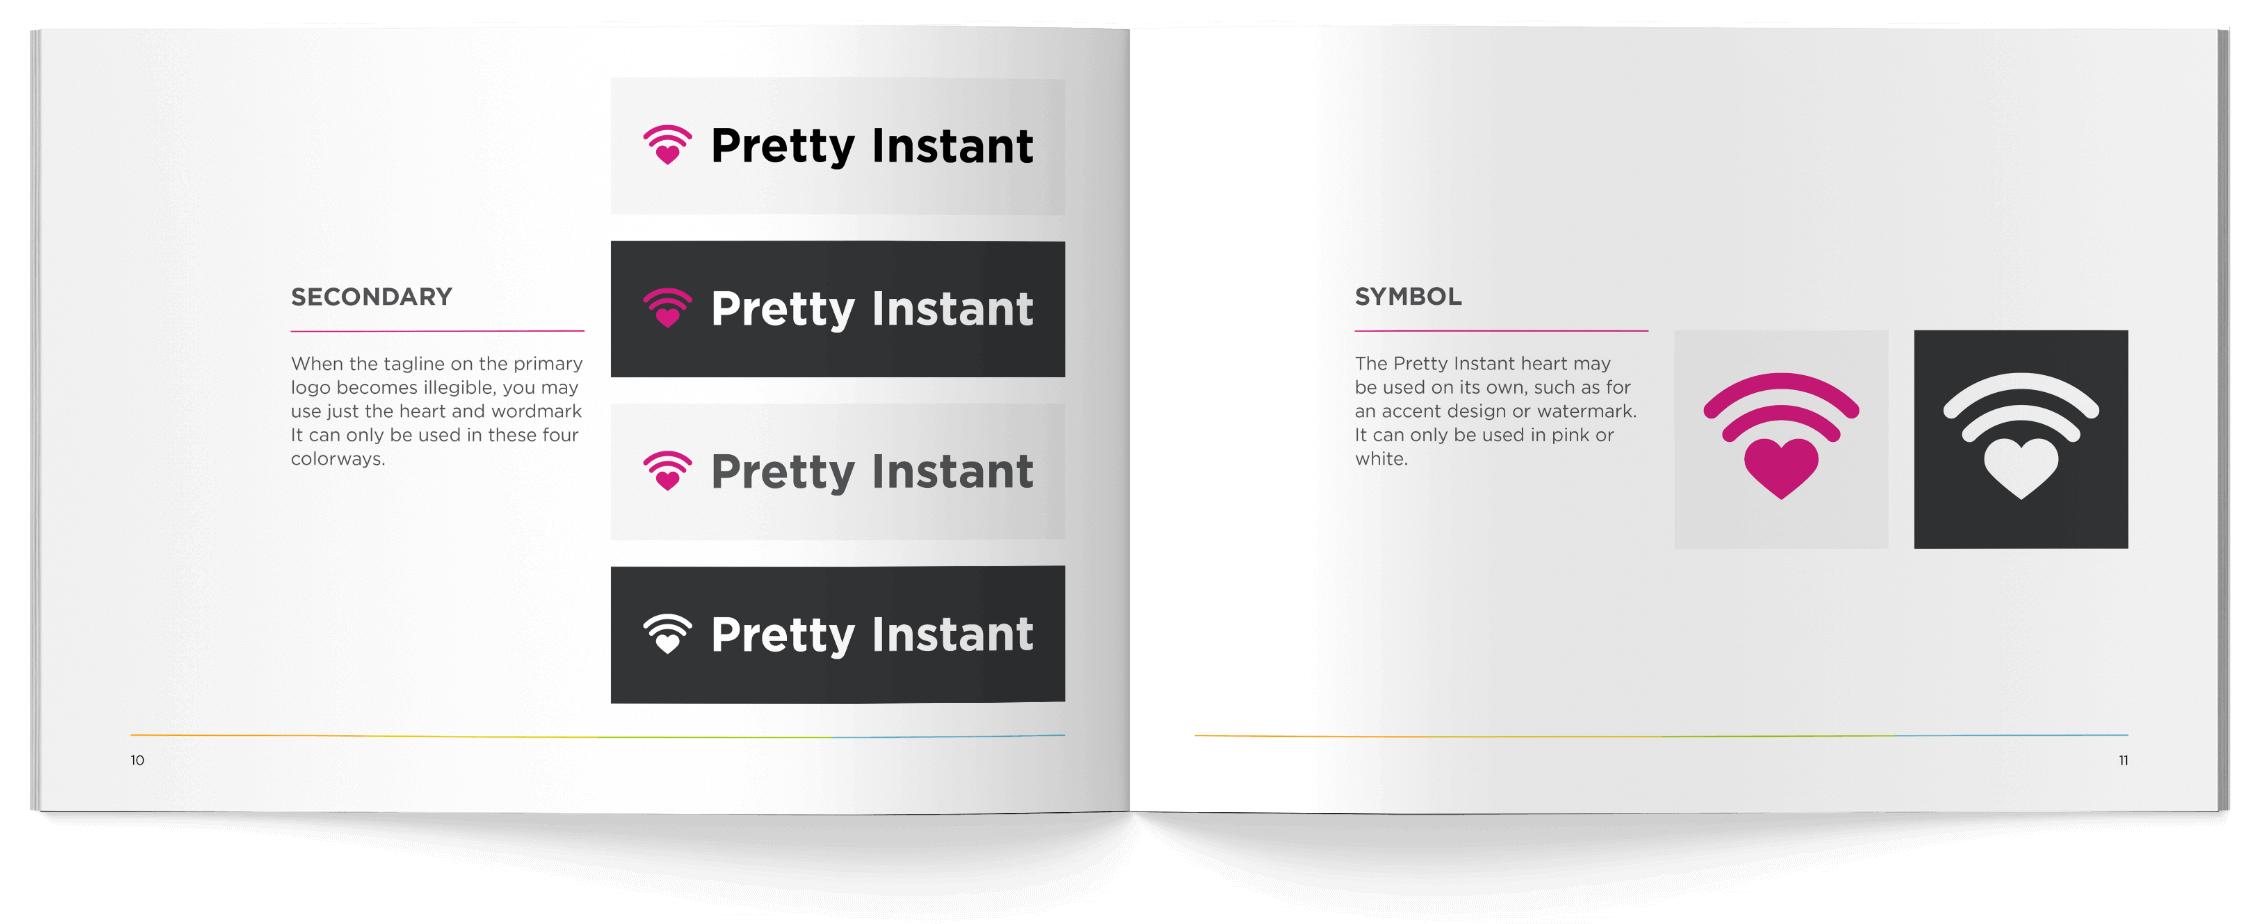 Logo pages of the Pretty Instant brand book